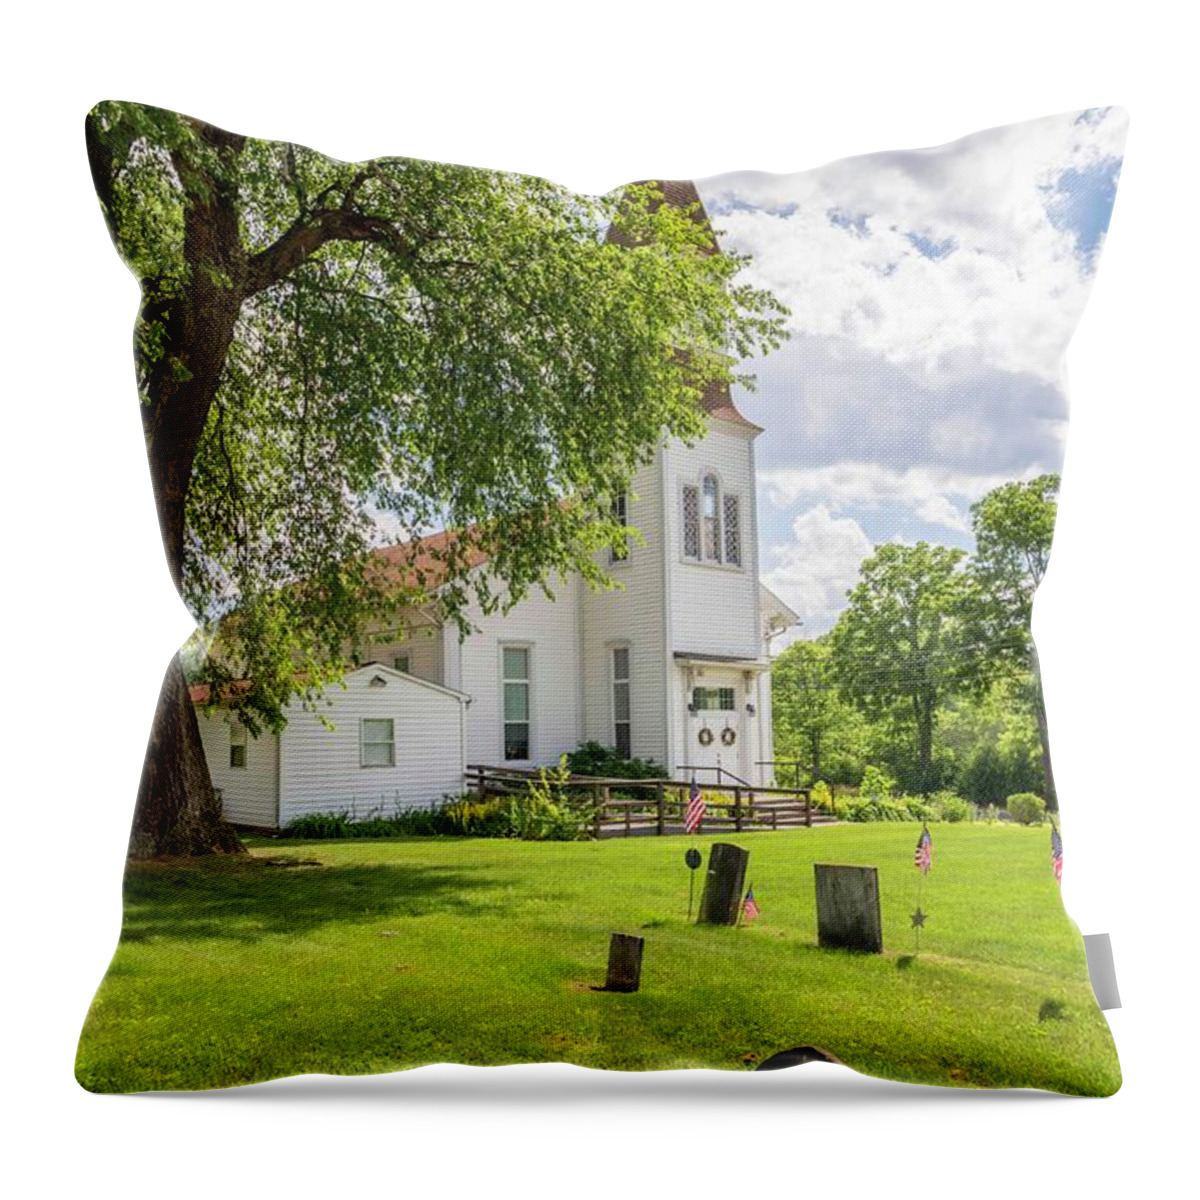 Governor Throw Pillow featuring the photograph Curtin United Methodist by R Thomas Berner